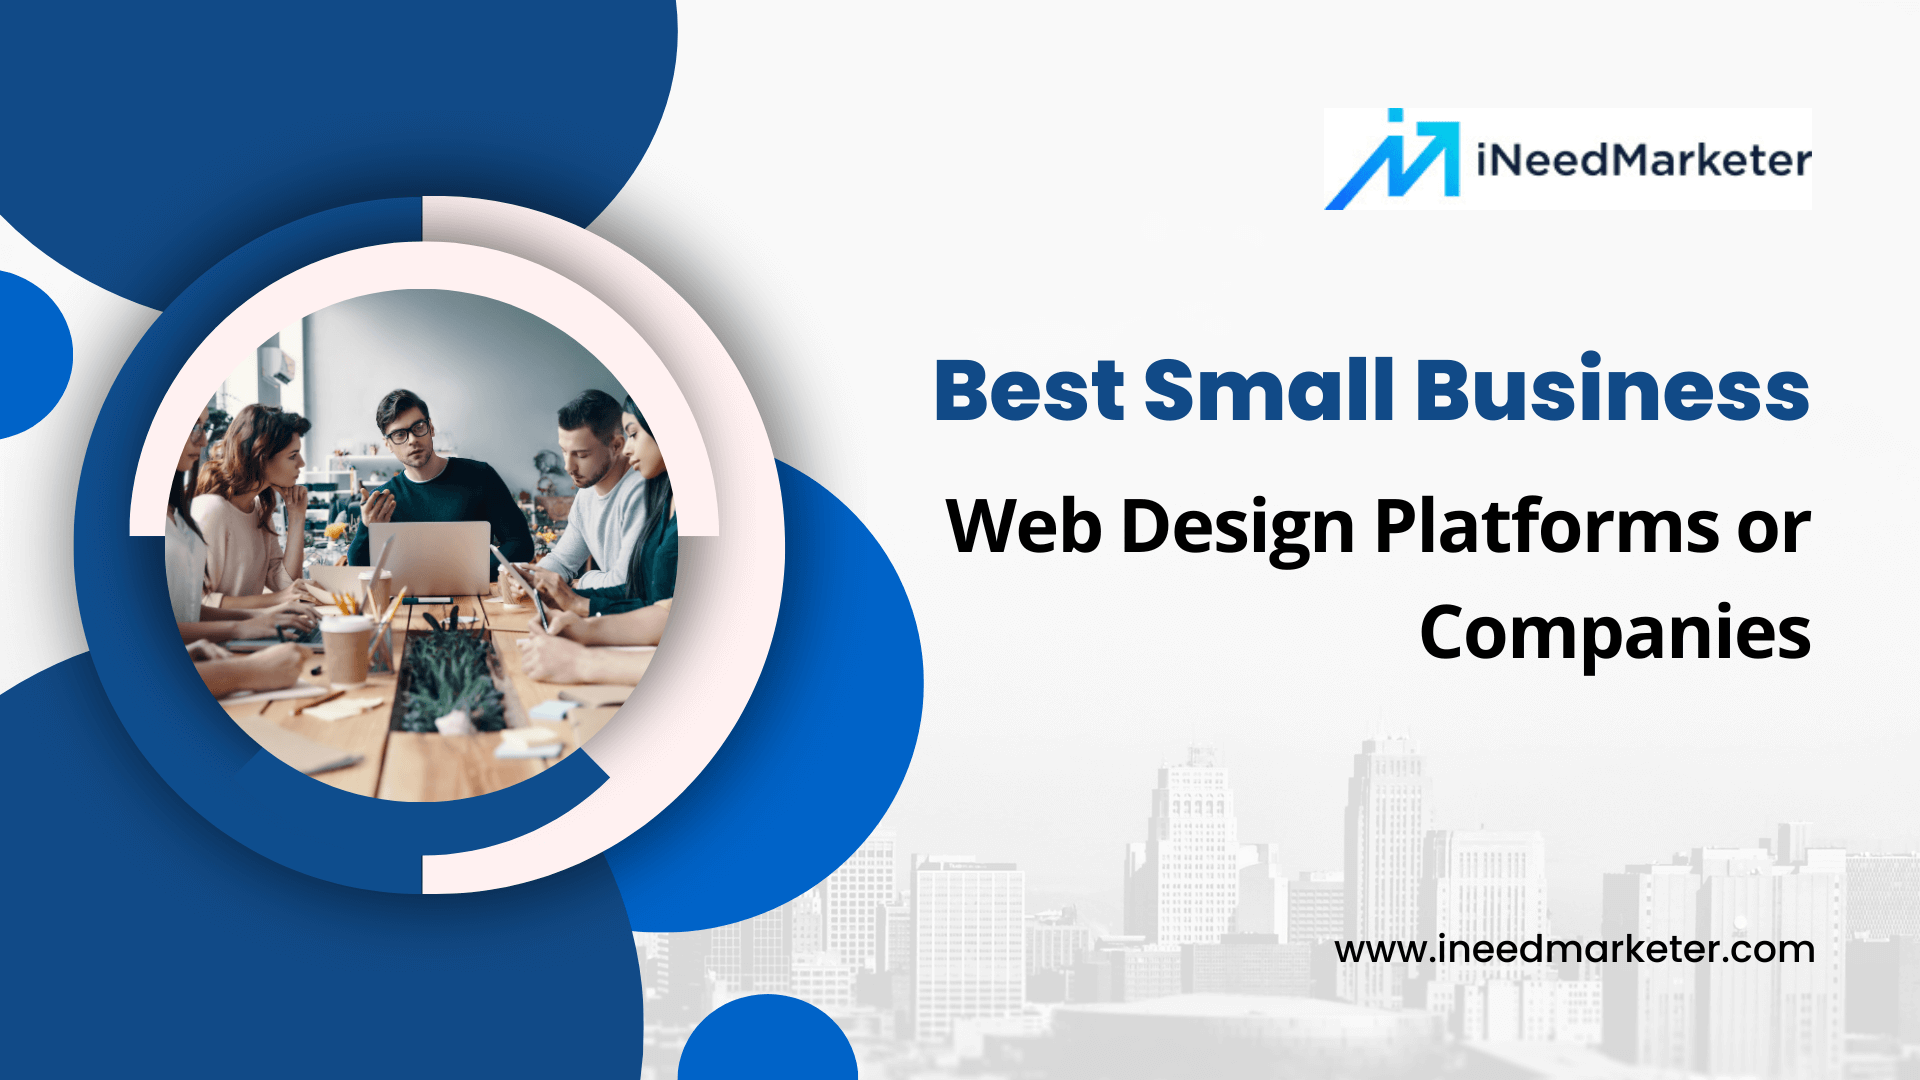 Best Small Business Web Design Companies or Platforms